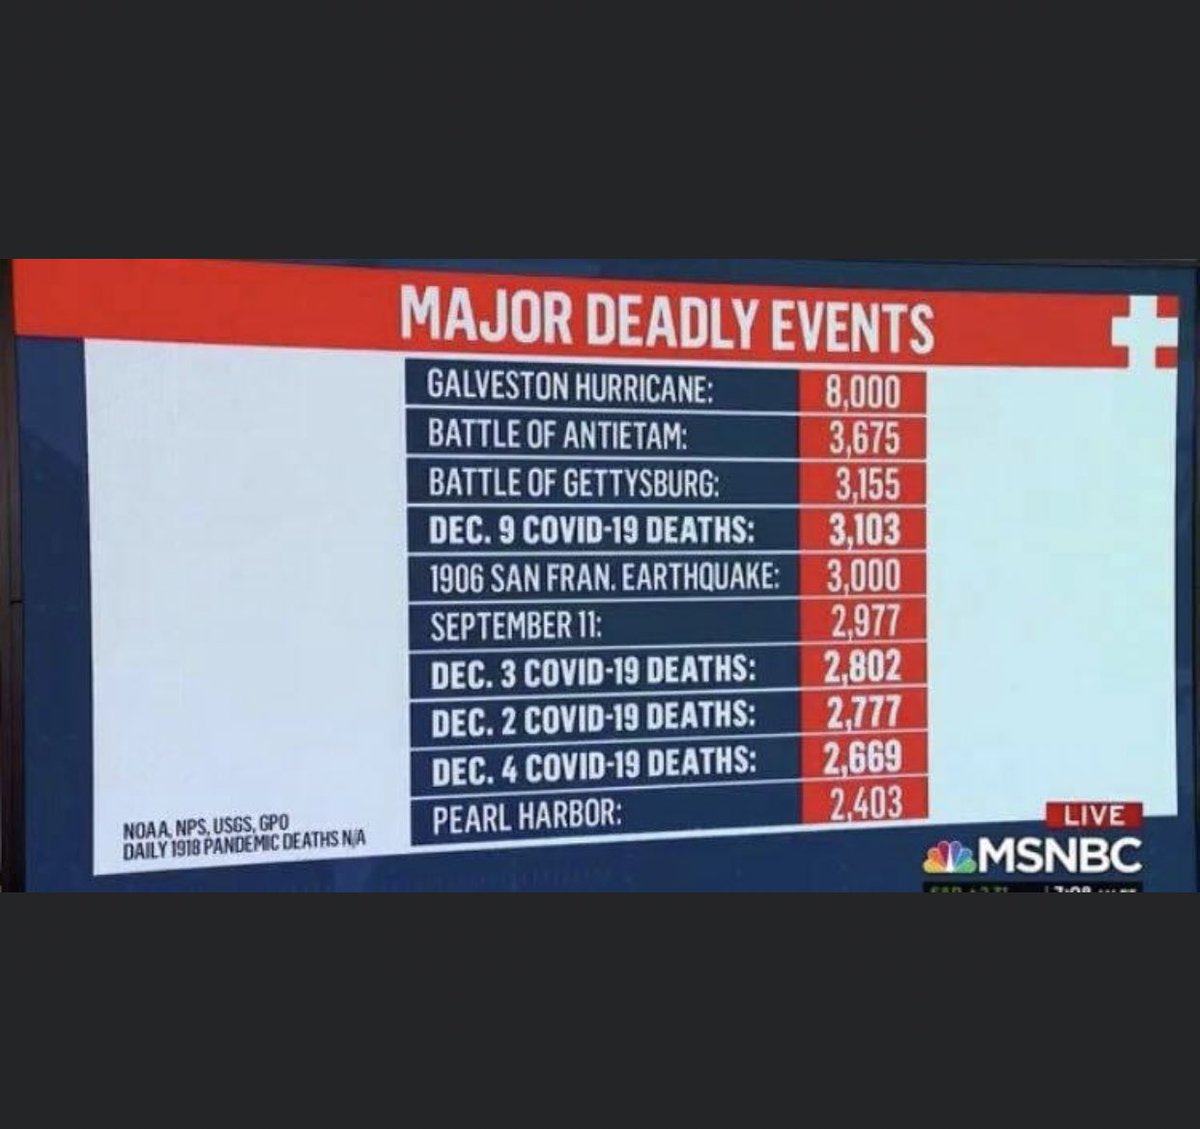 I — MSNBC, wyd?? To be fair this is, in fact, a list of “major deadly events”. I don’t have the audio for this graphic so idk the full context but.... 